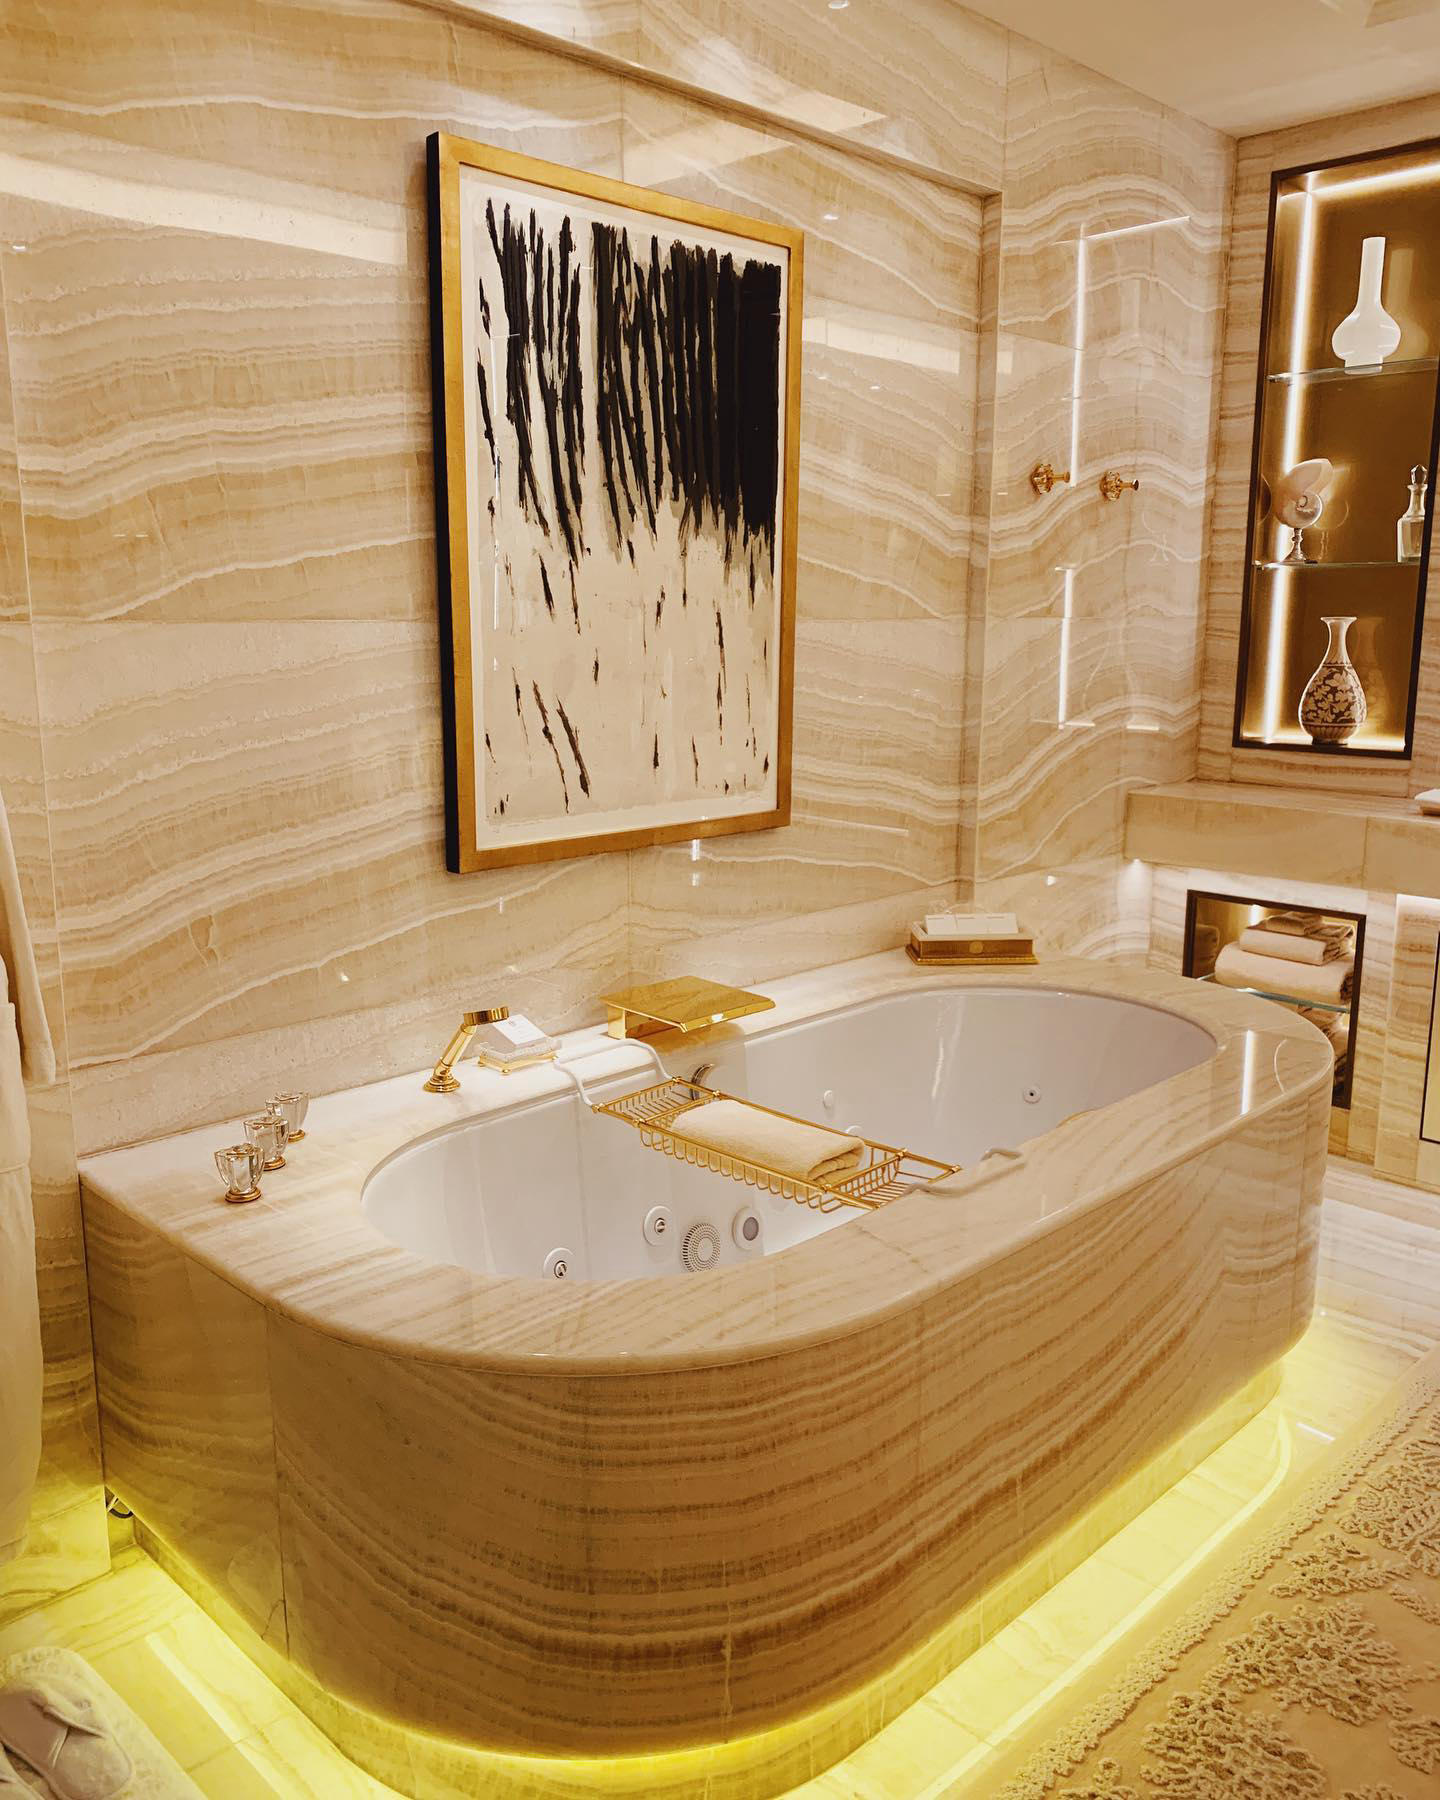 image  1 Four Seasons George V Paris - Enjoy a moment of pure relaxation in the comfort of the bathtub of our